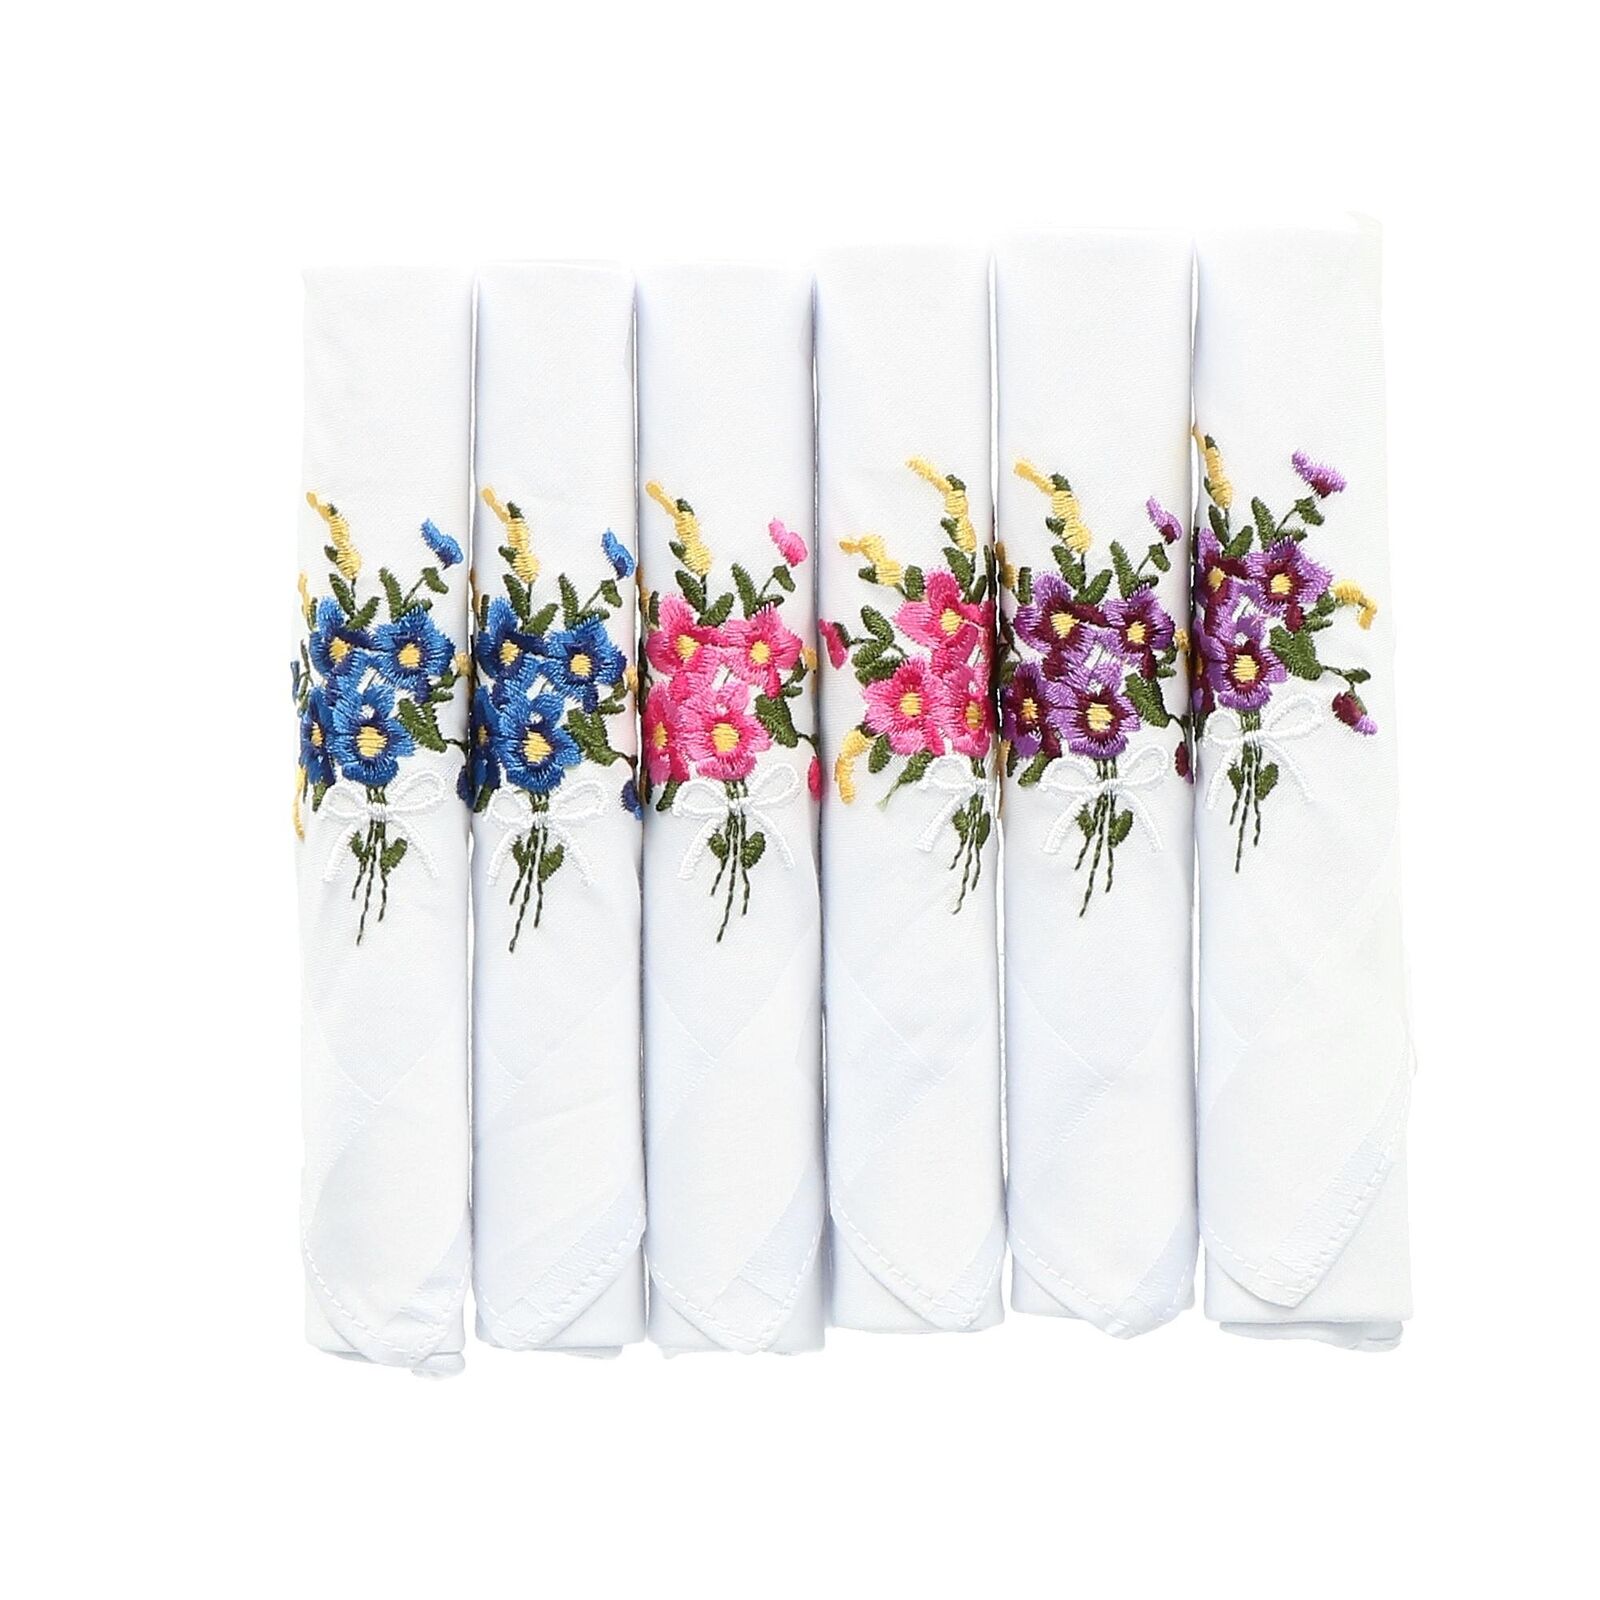 New Selini Women's Floral Embroidered Cotton Handkerchief Set (Pack of 6)